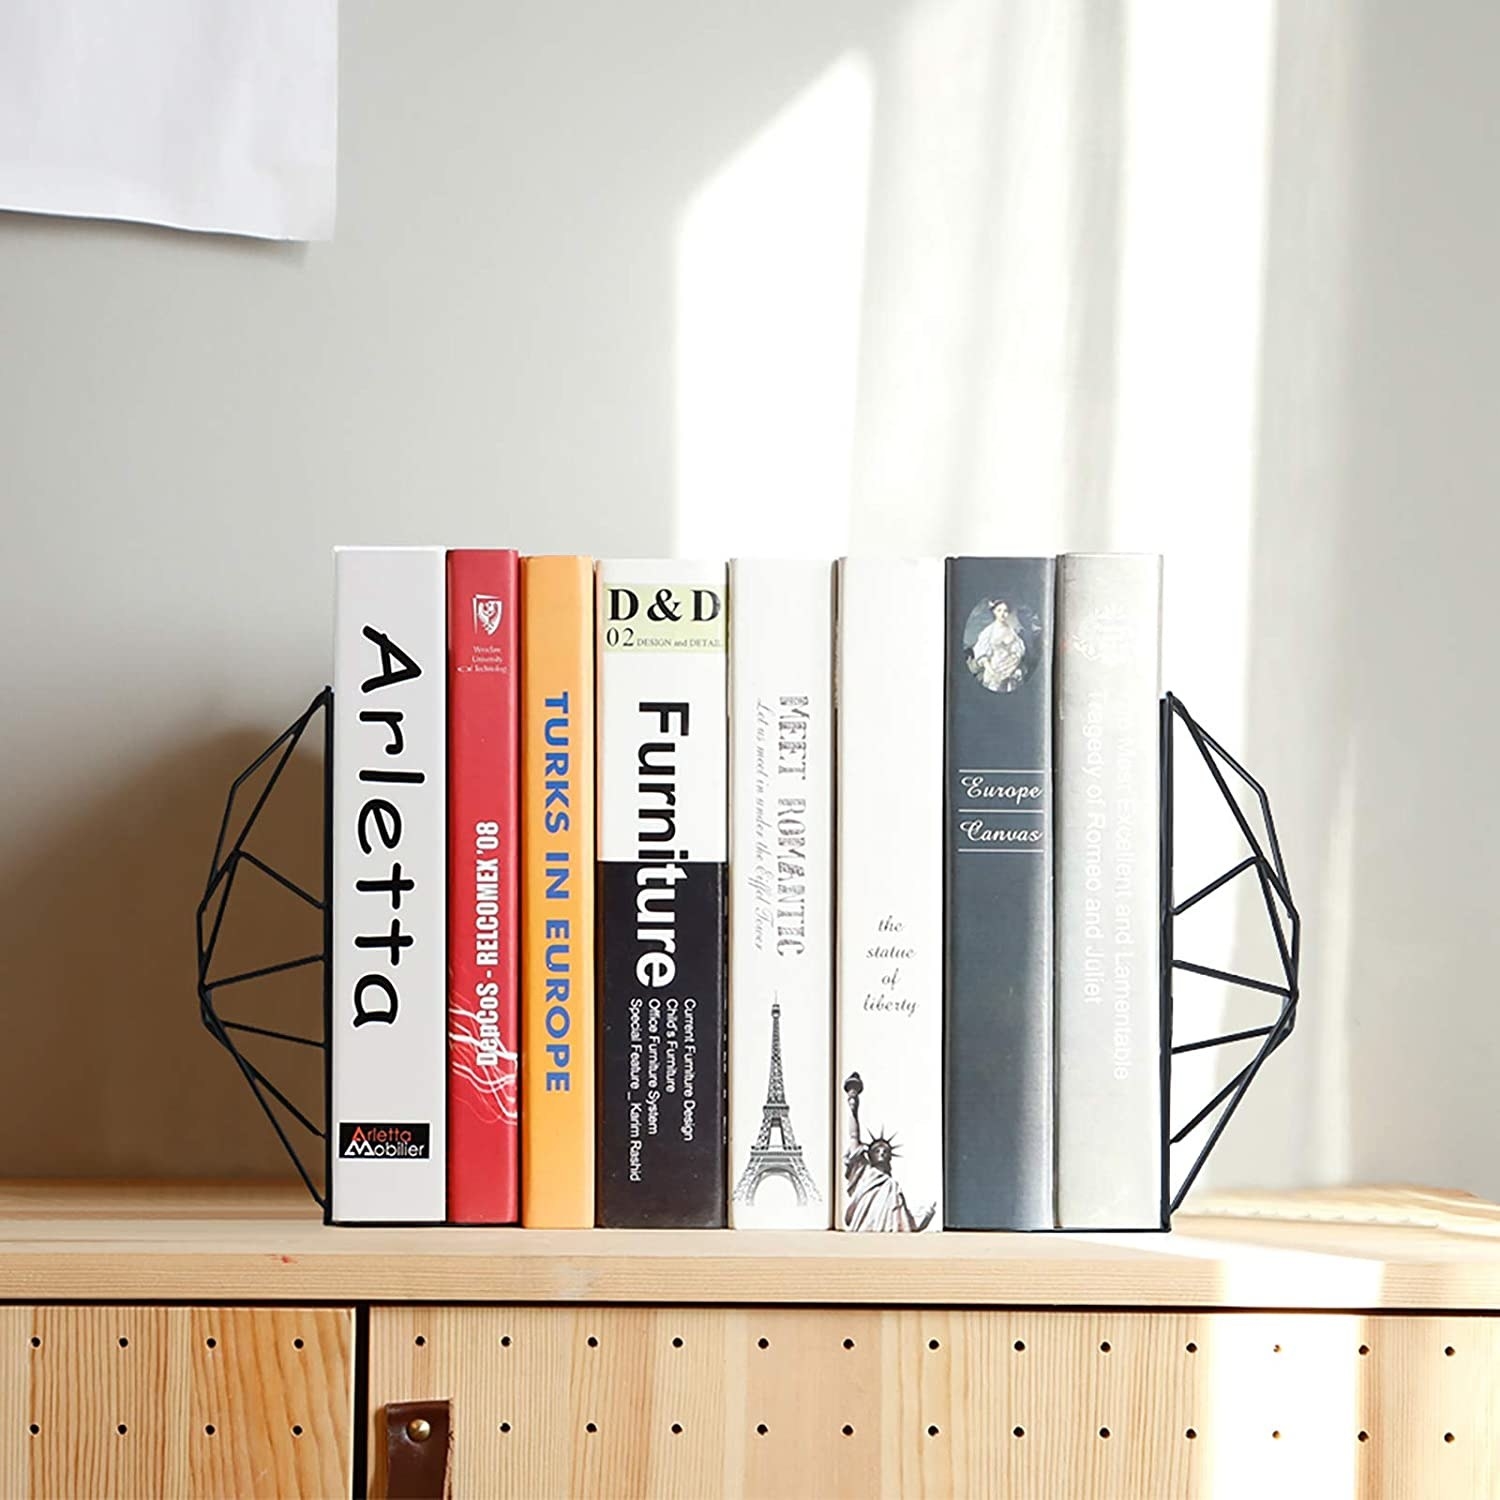 the geometric bookends holding a set of books together